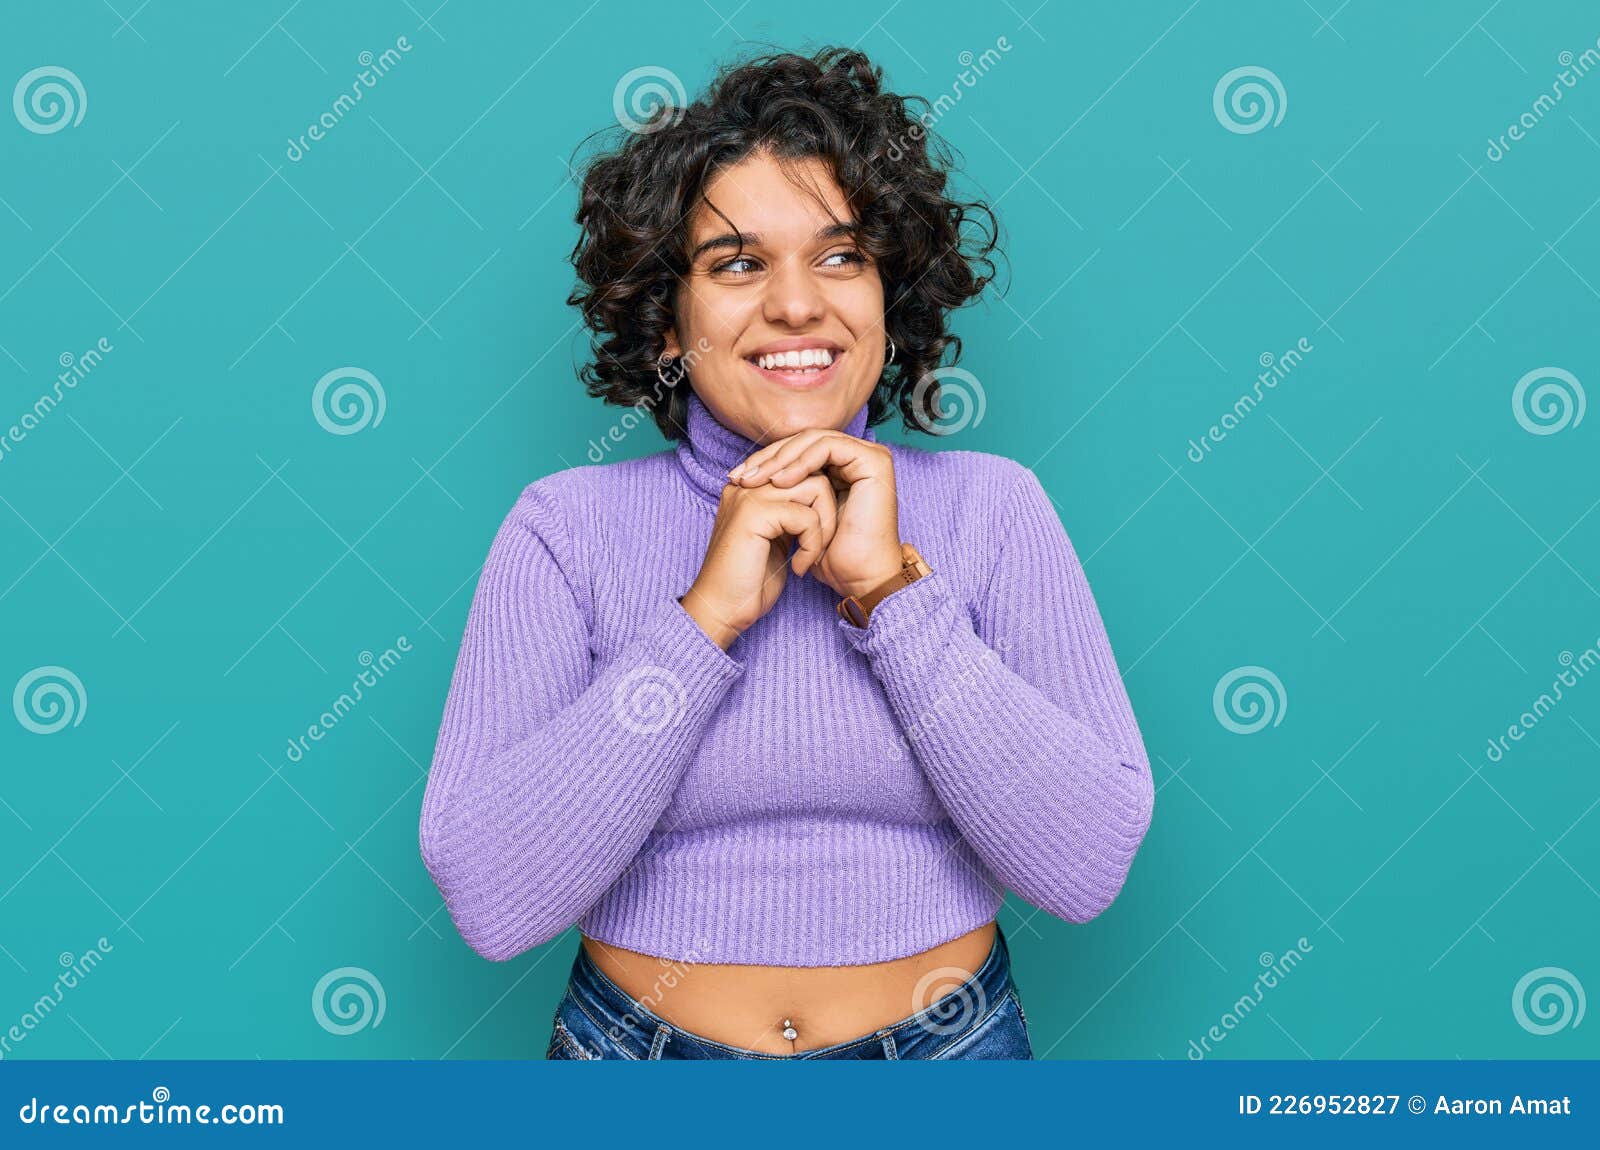 Young Hispanic Woman With Curly Hair Wearing Casual Clothes Laughing Nervous And Excited With 